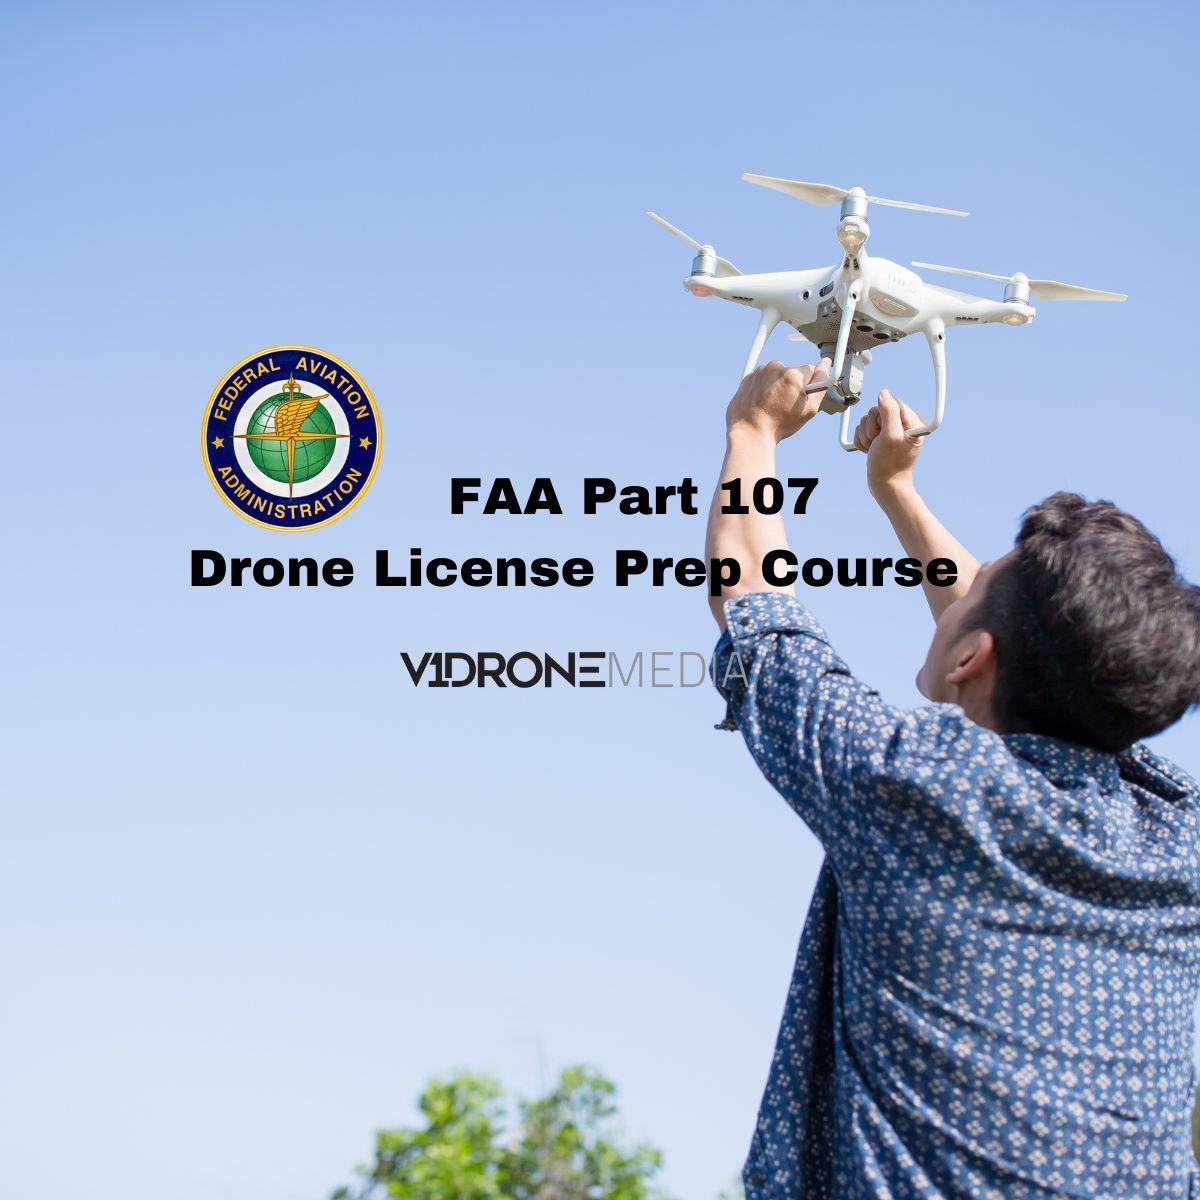 Join Part 107 Drone Course